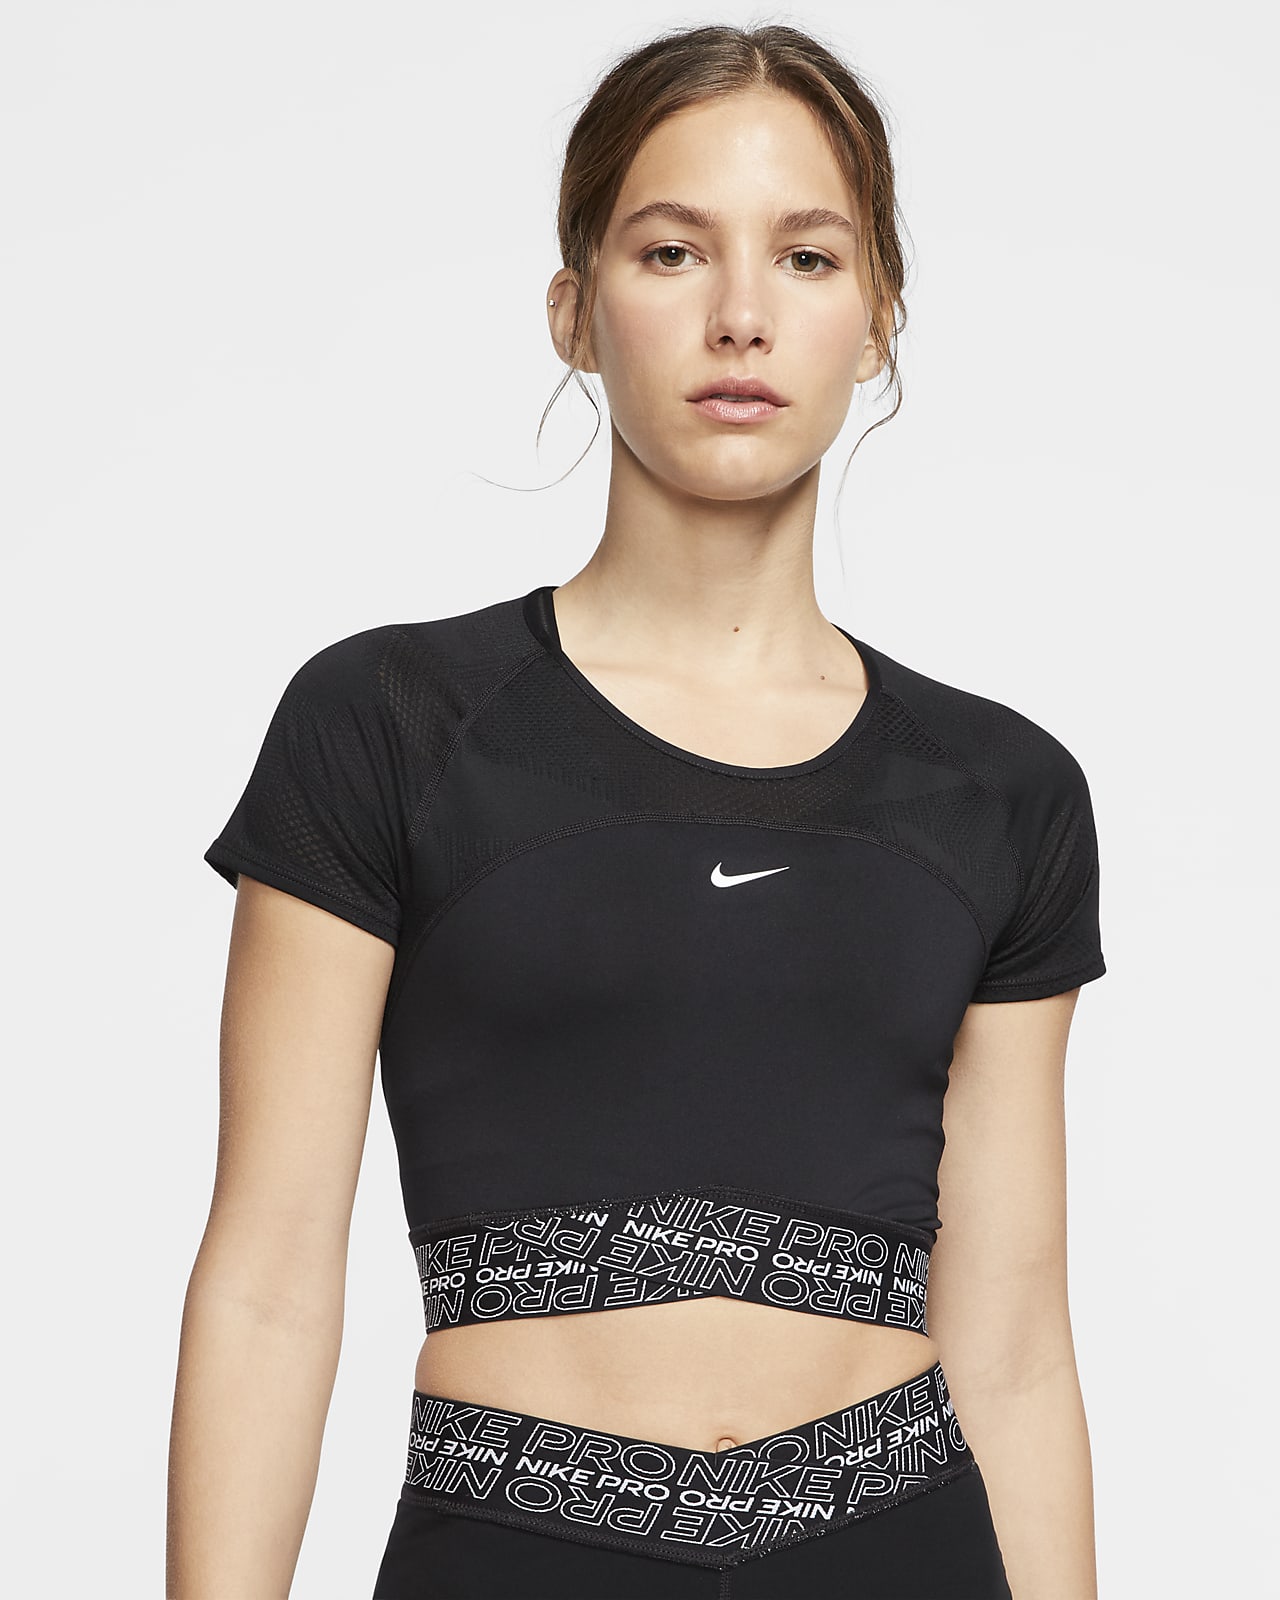 nike women's pro breathable cropped tank top